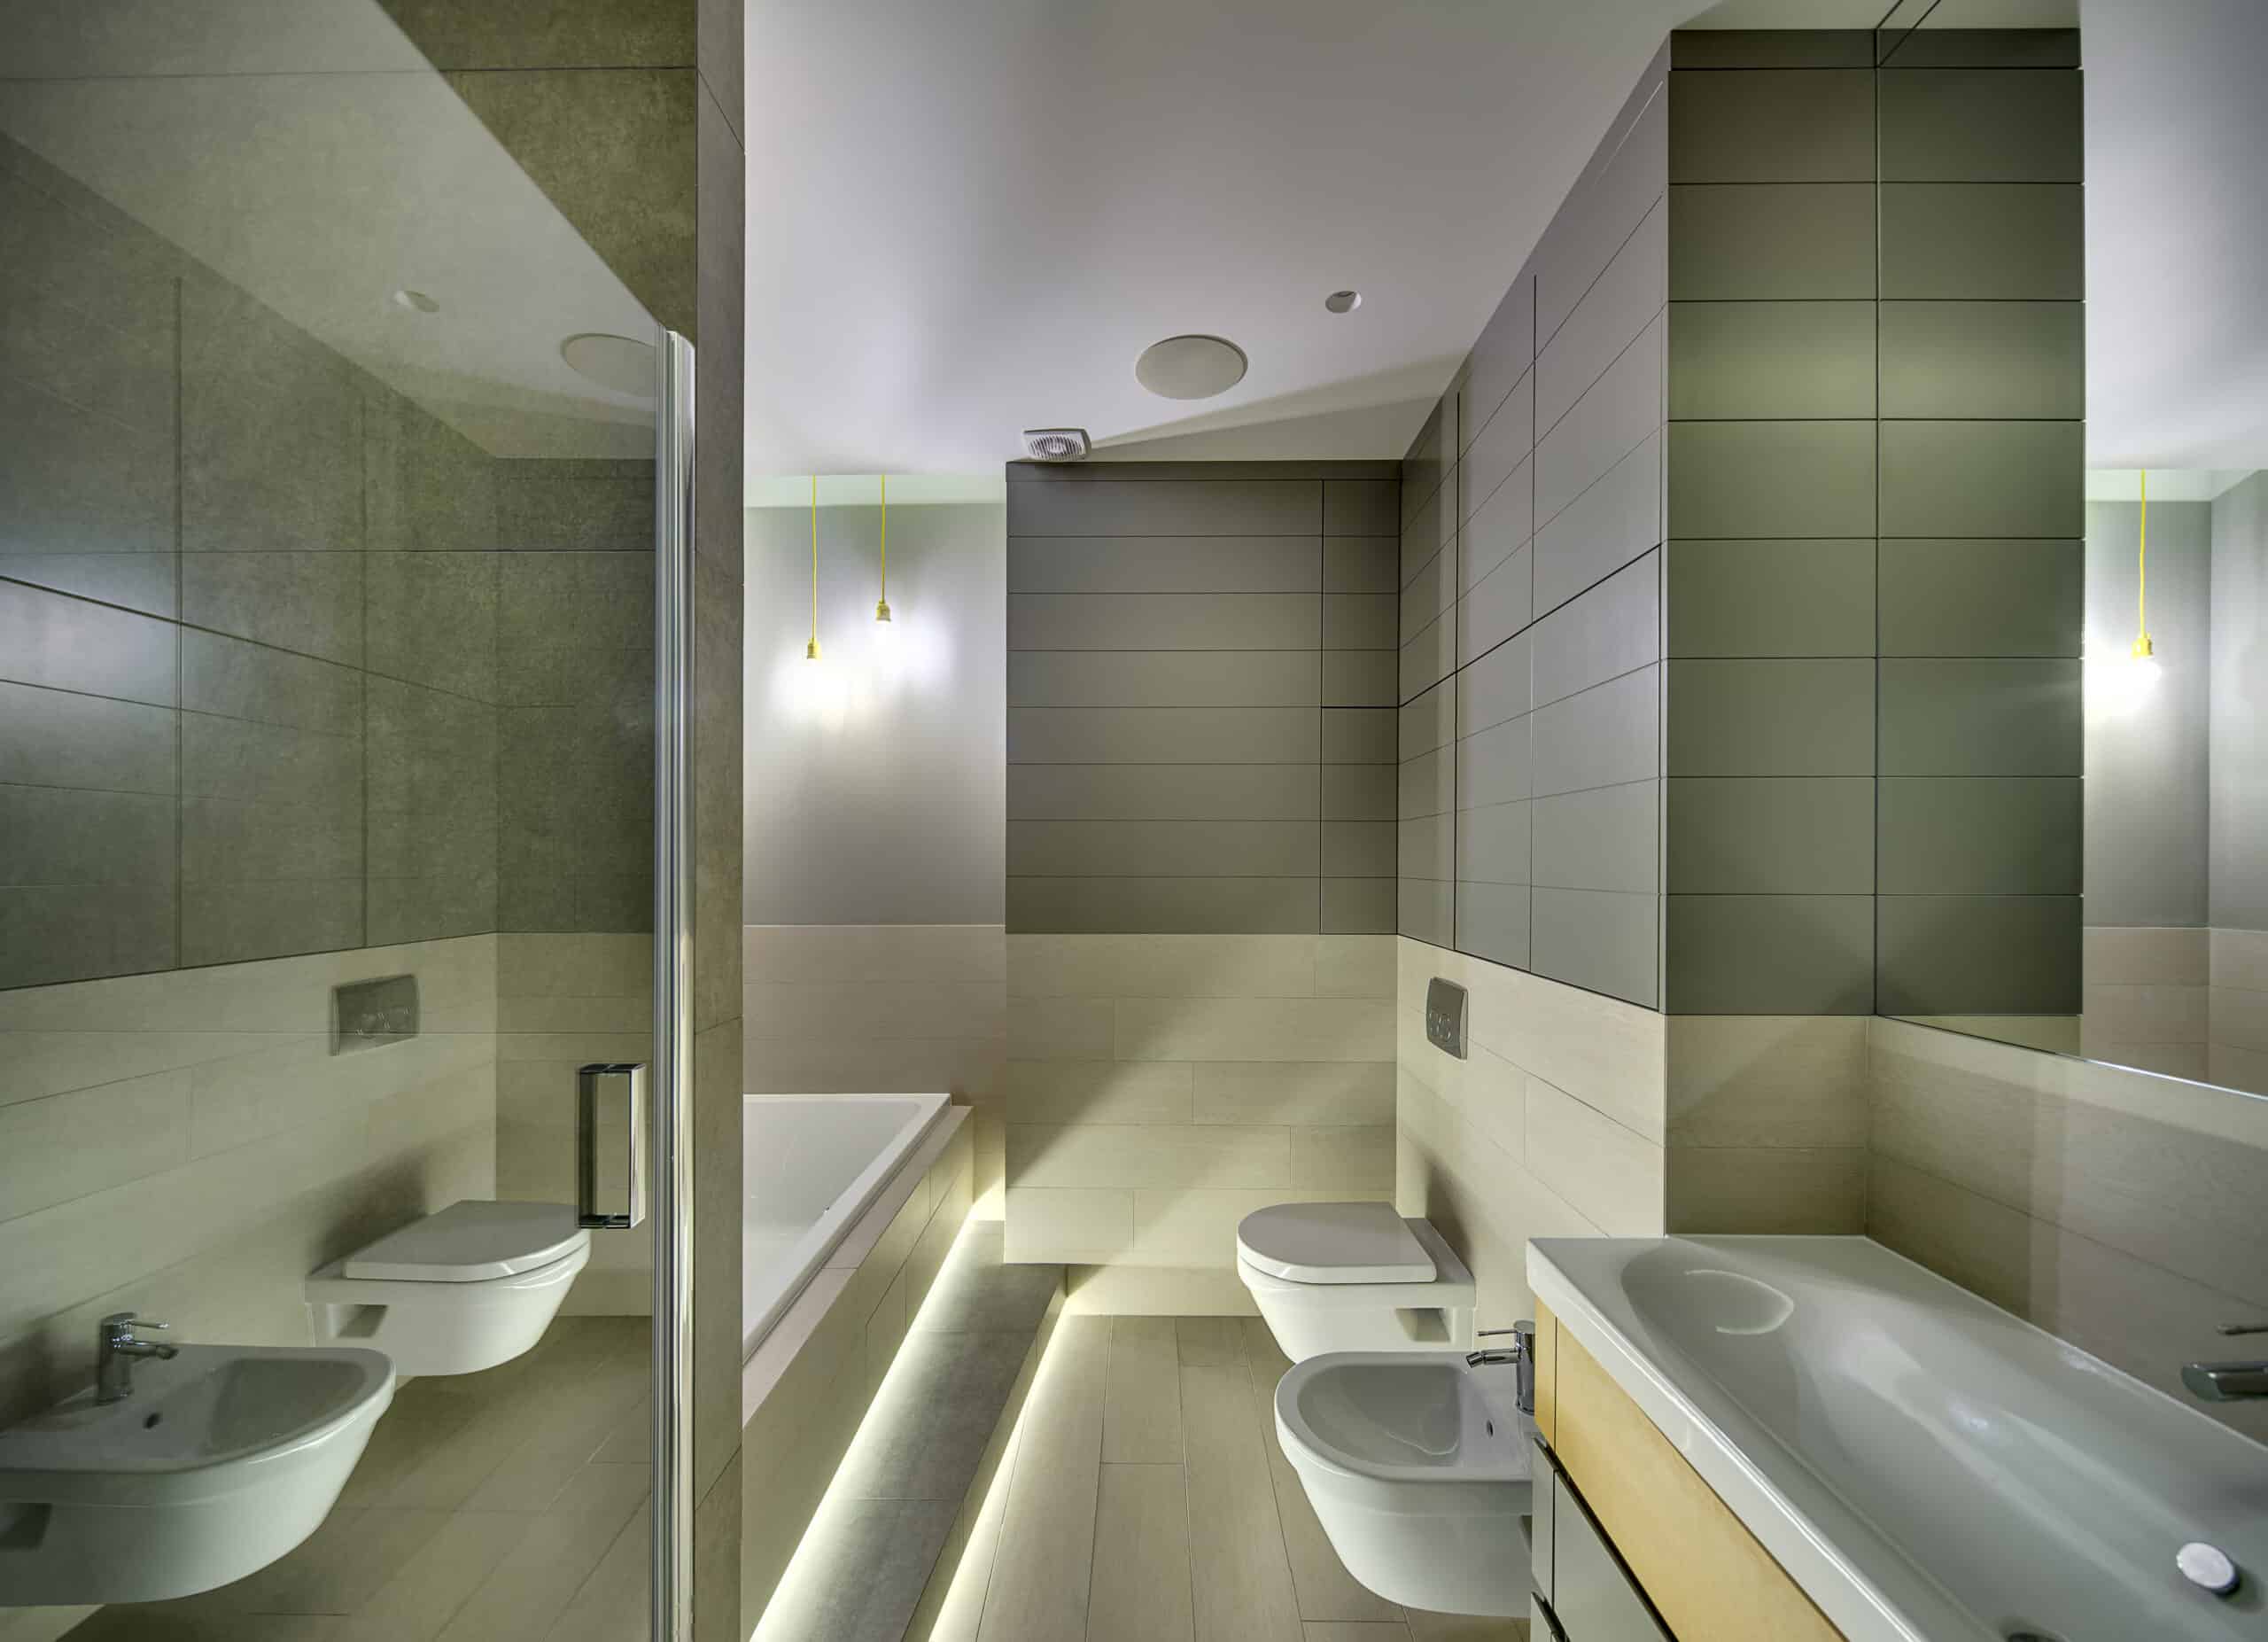 Bathroom in a modern style with tiles on the walls and floor. There is a sink with a faucet, white toilet and a bide, white bath, glass door, mirror, glowing lamps. Horizontal.